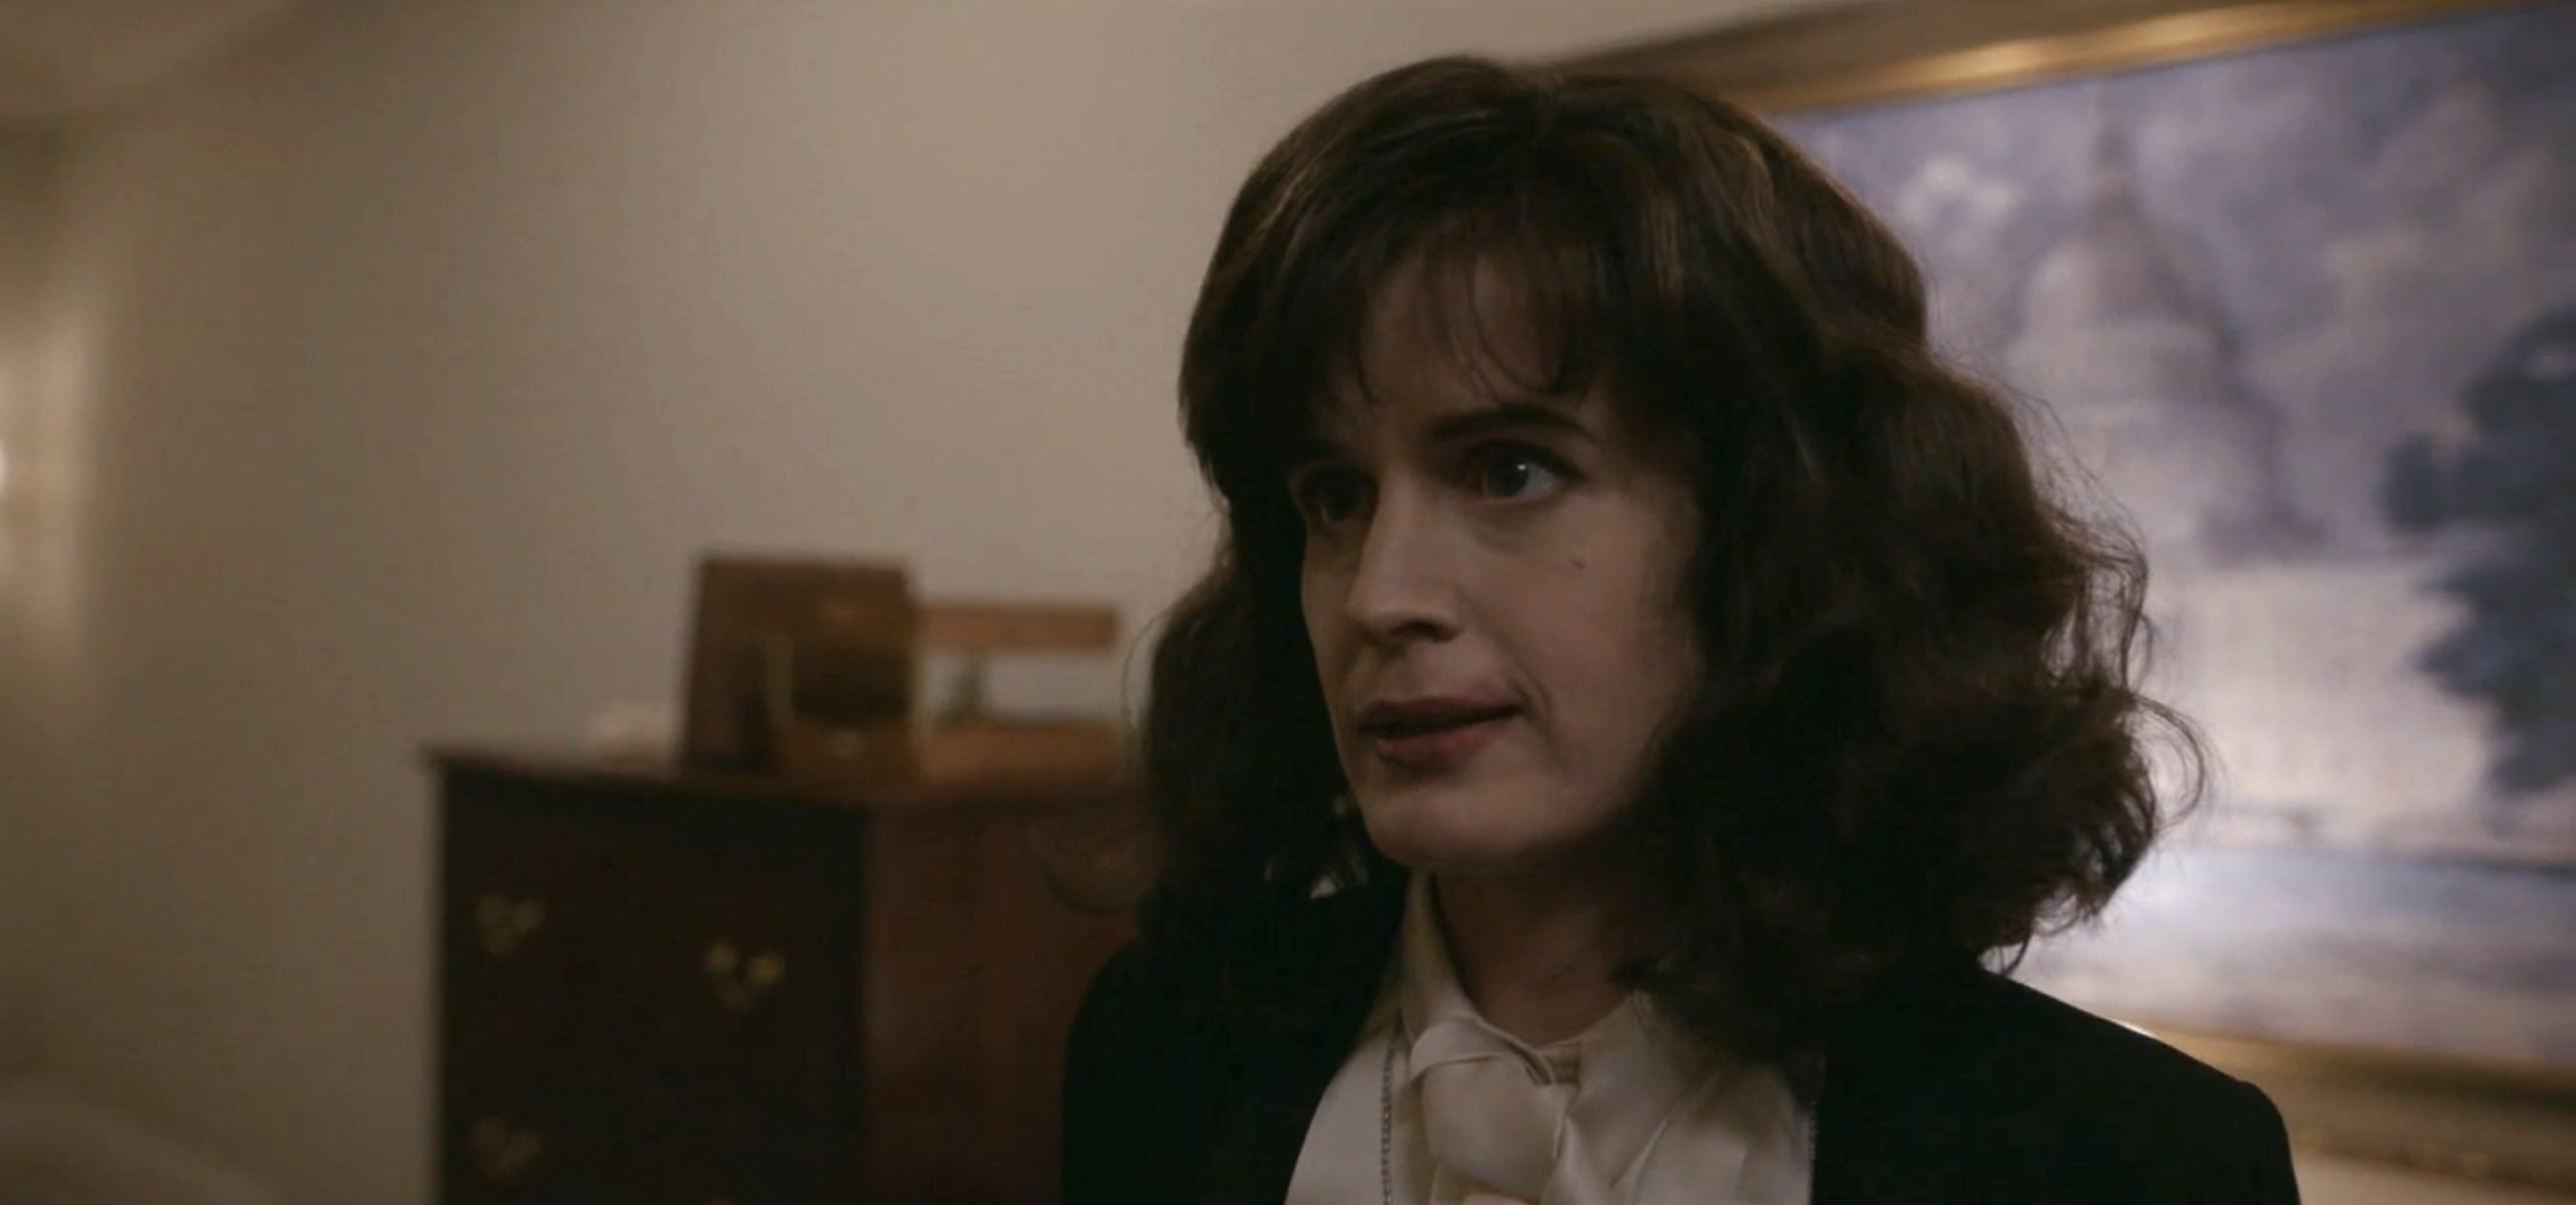 Impeachment: American Crime Story Cast - Elizabeth Reaser as Kathleen Willey